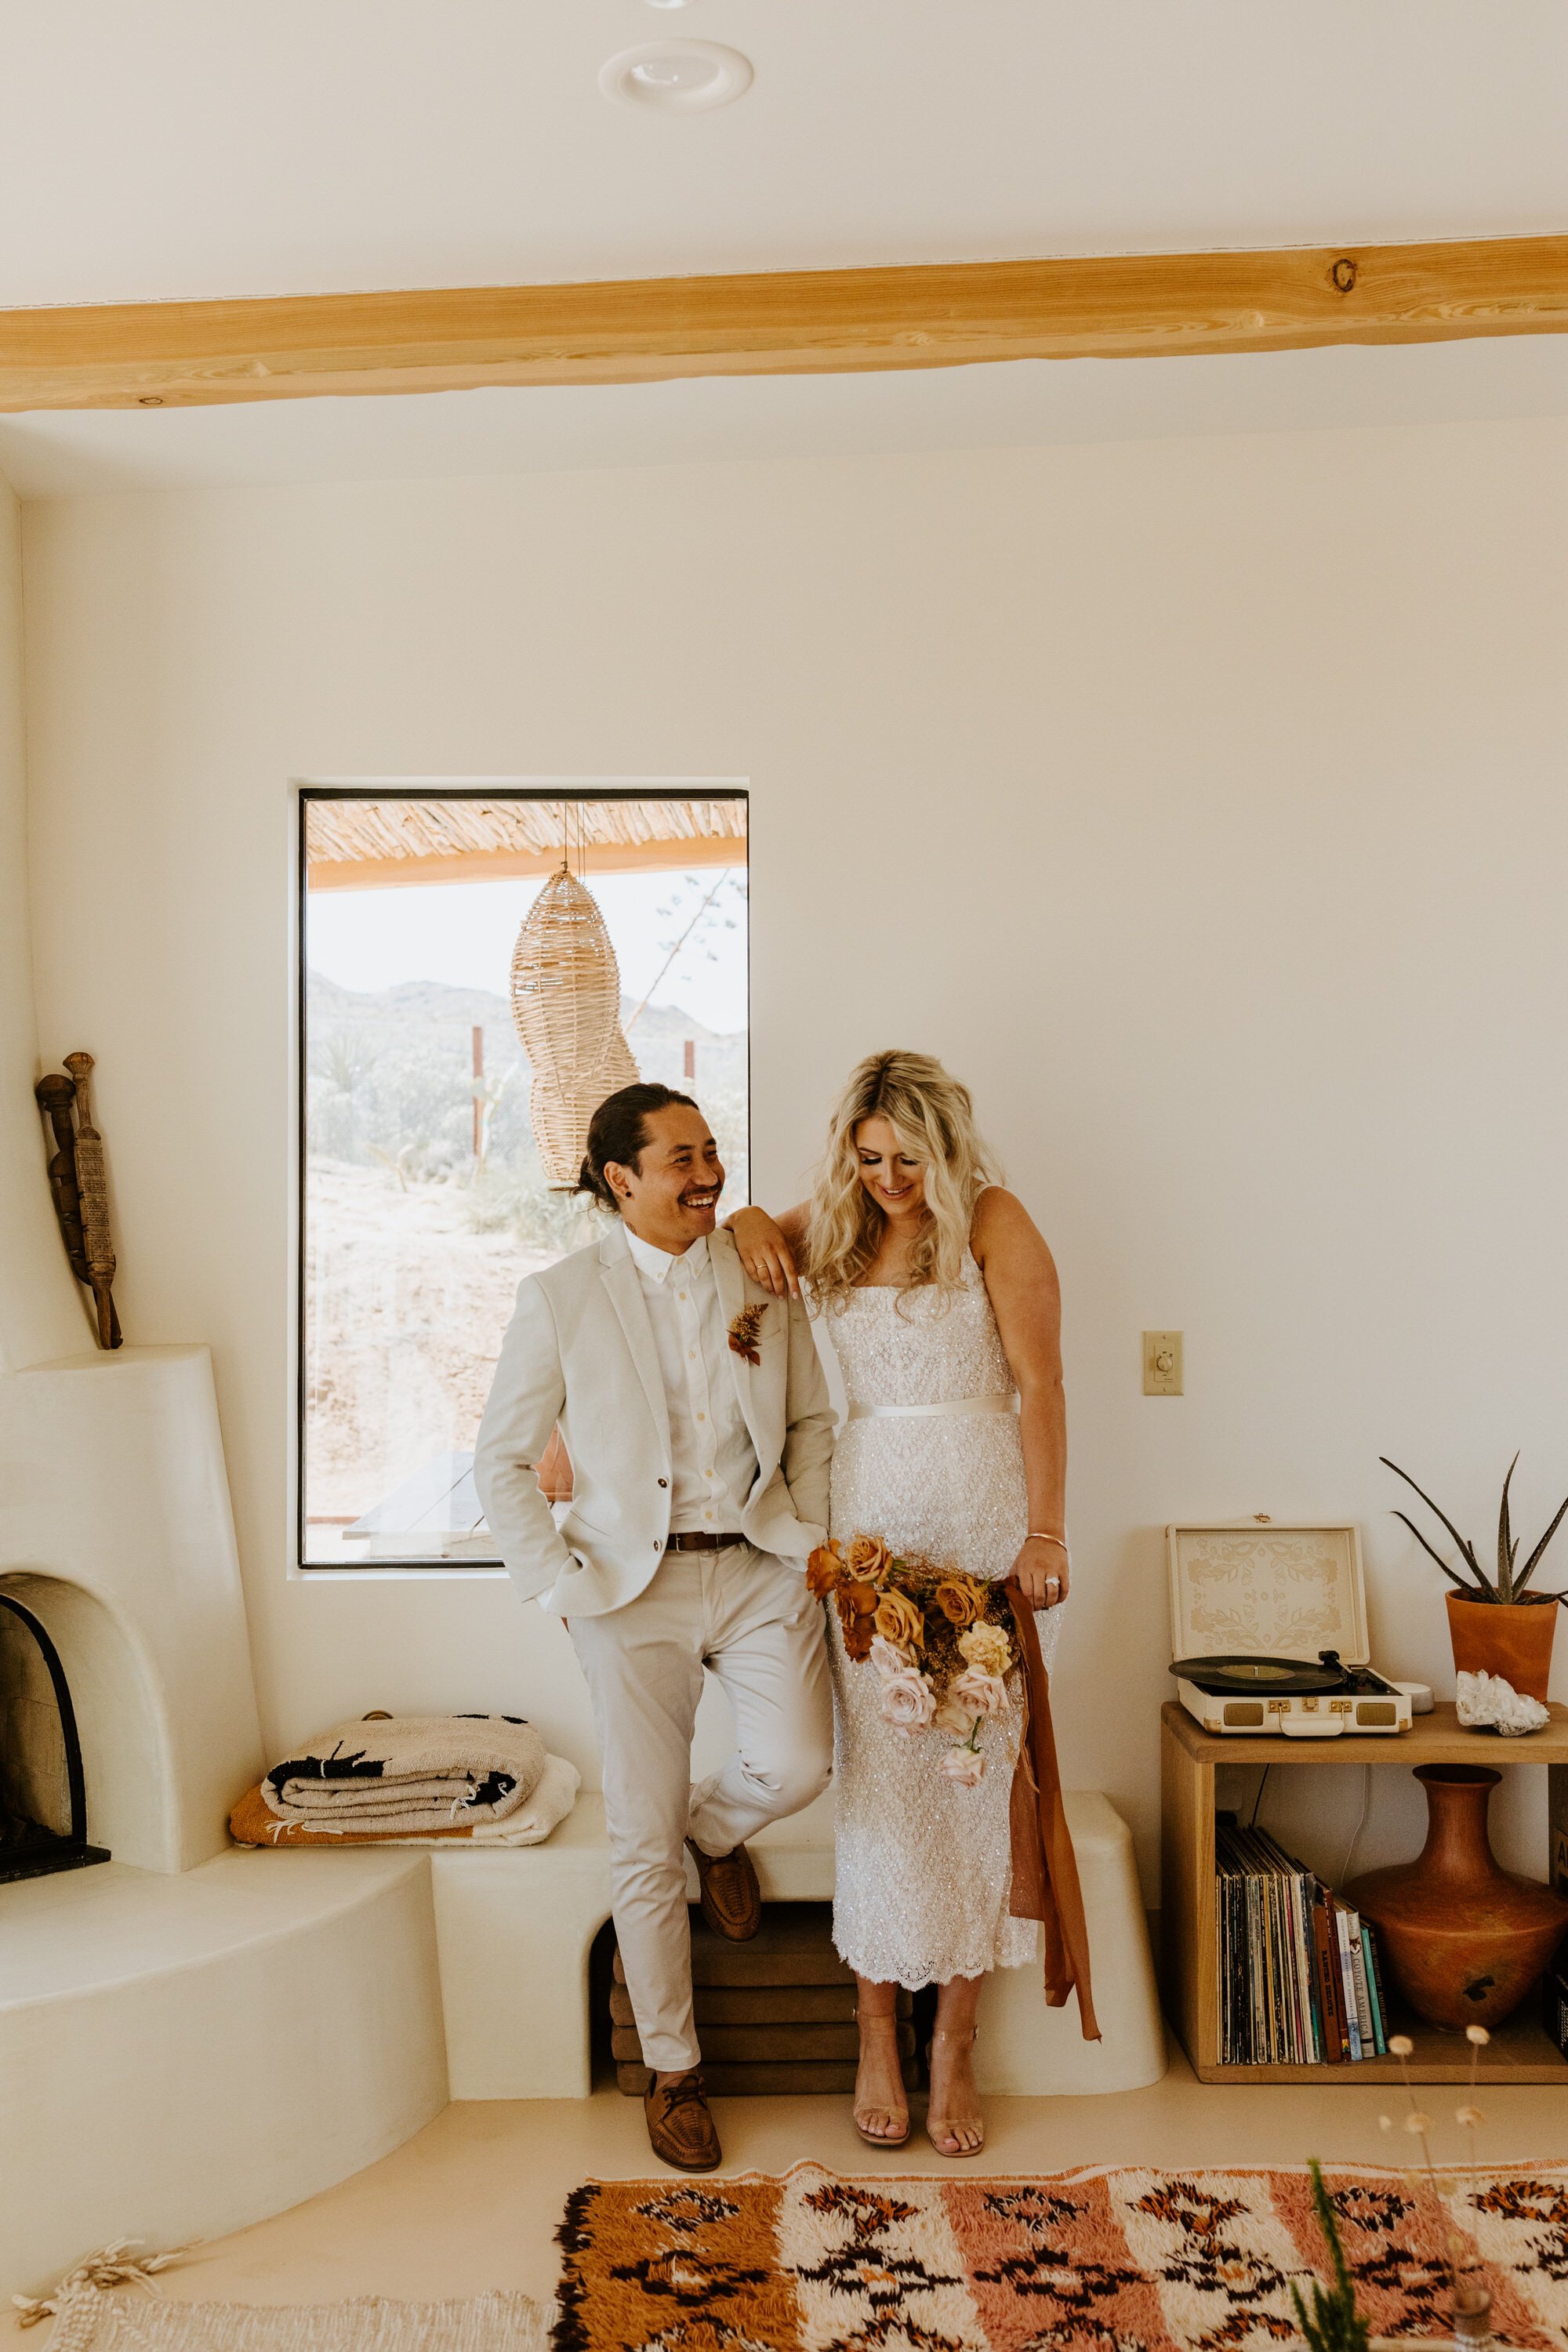 Boho Joshua Tree elopement at Desert Wild JT airbnb | Dried palm leaves, pampas grass, neutral rust florals | Tida Svy | www.tidasvy.com